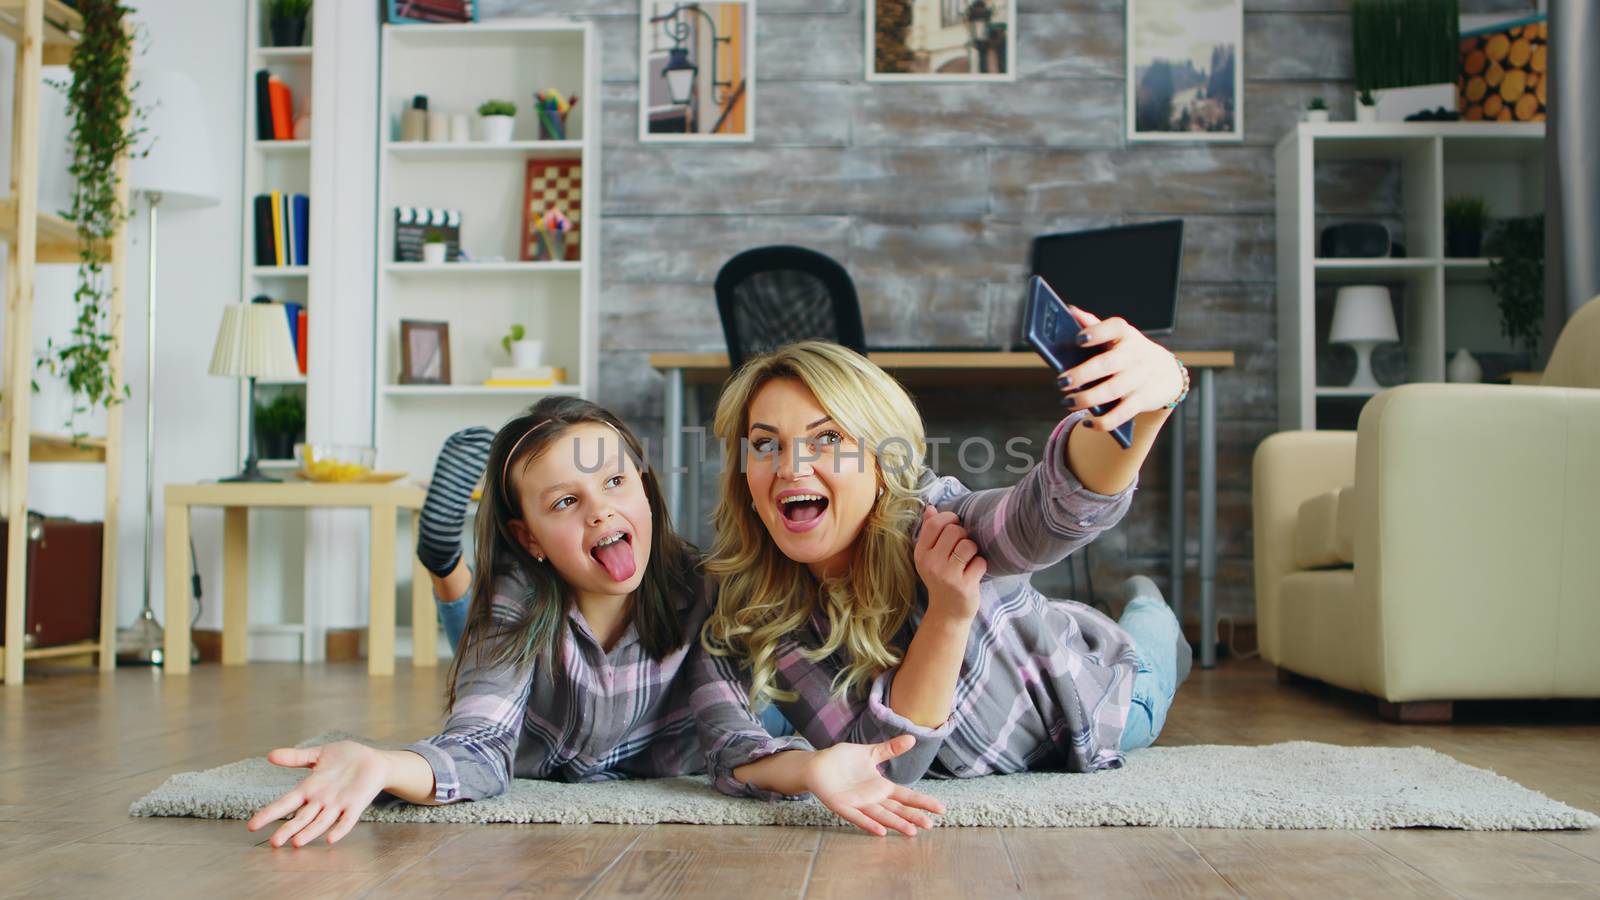 Mother and daughter lying on the floor taking a selfie with smartphone.